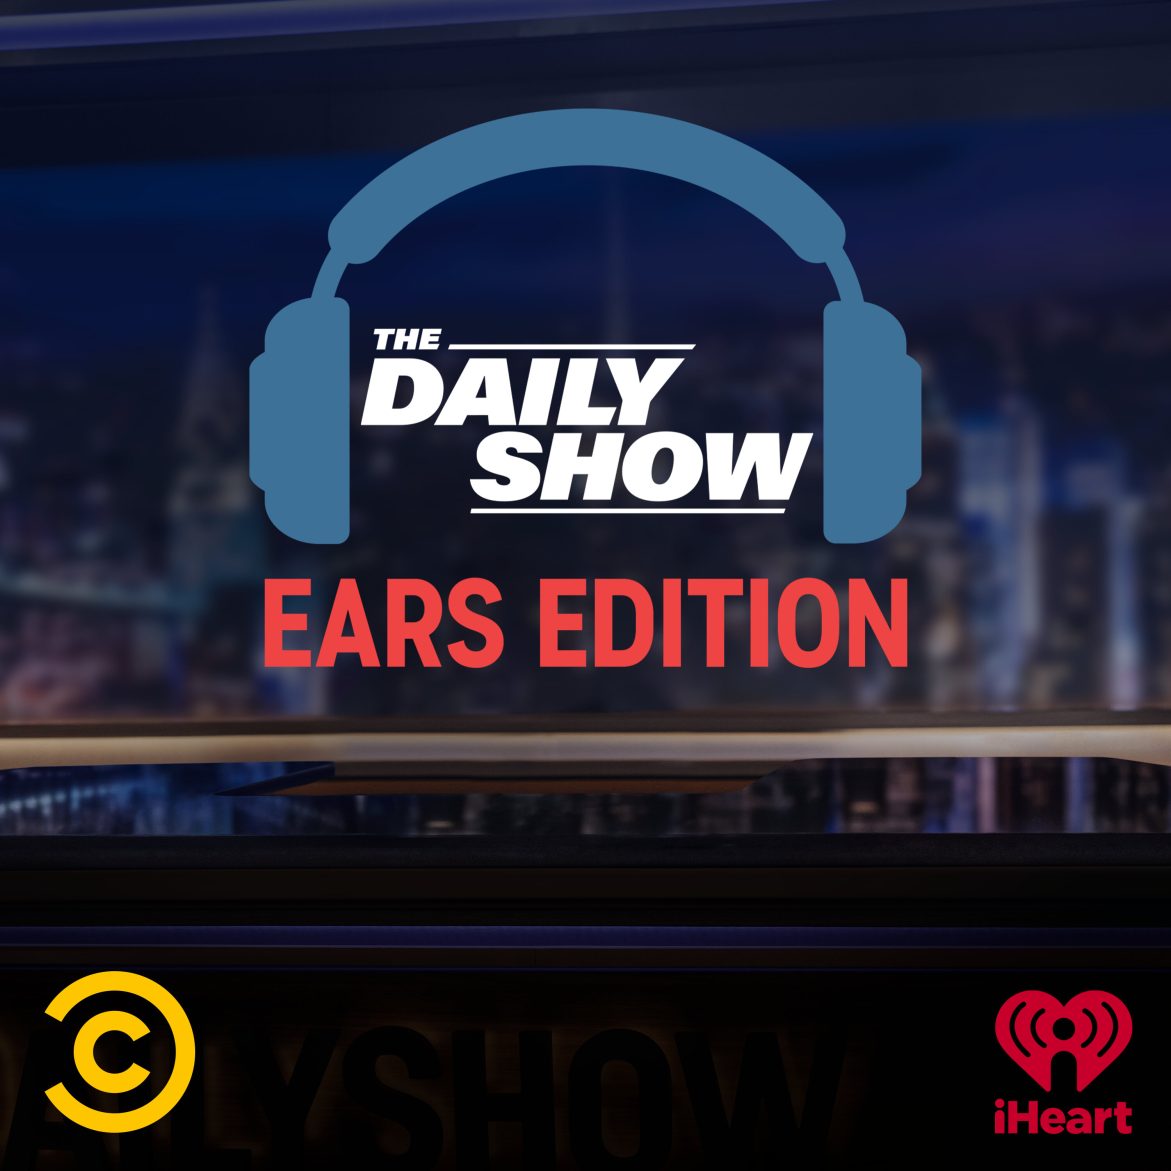 Black Podcasting - The Daily Show's Grammy Nominated Guests!